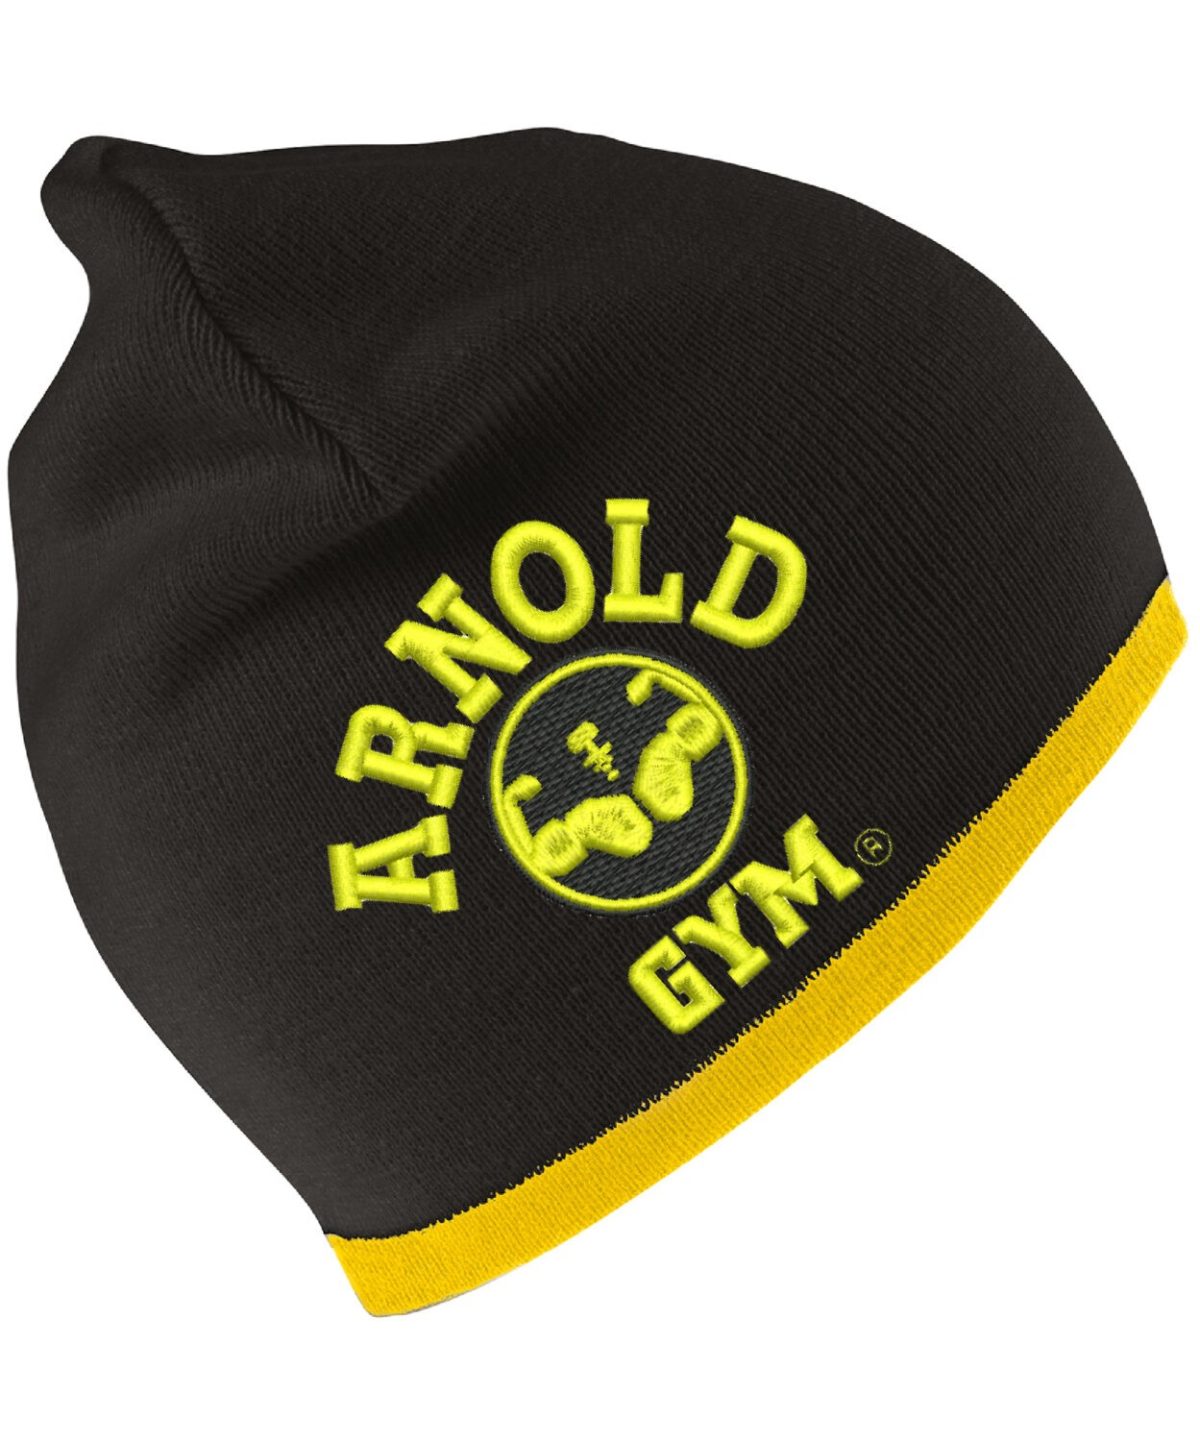 arnold gym beanie hat yellow embroidery black cap